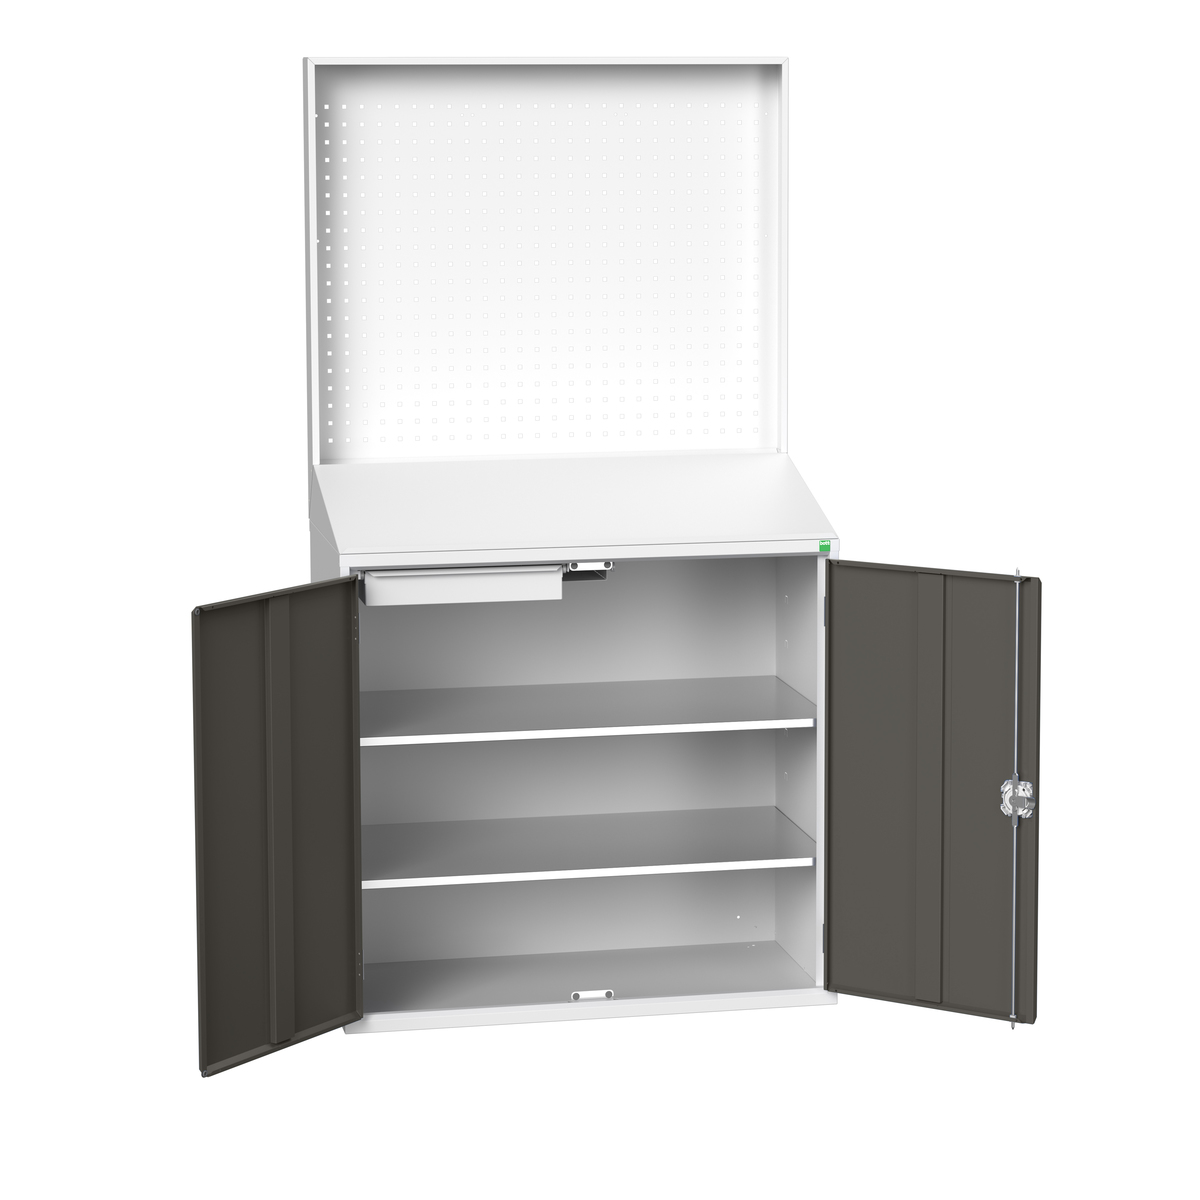 16929216.19 - verso economy lectern with backpanel